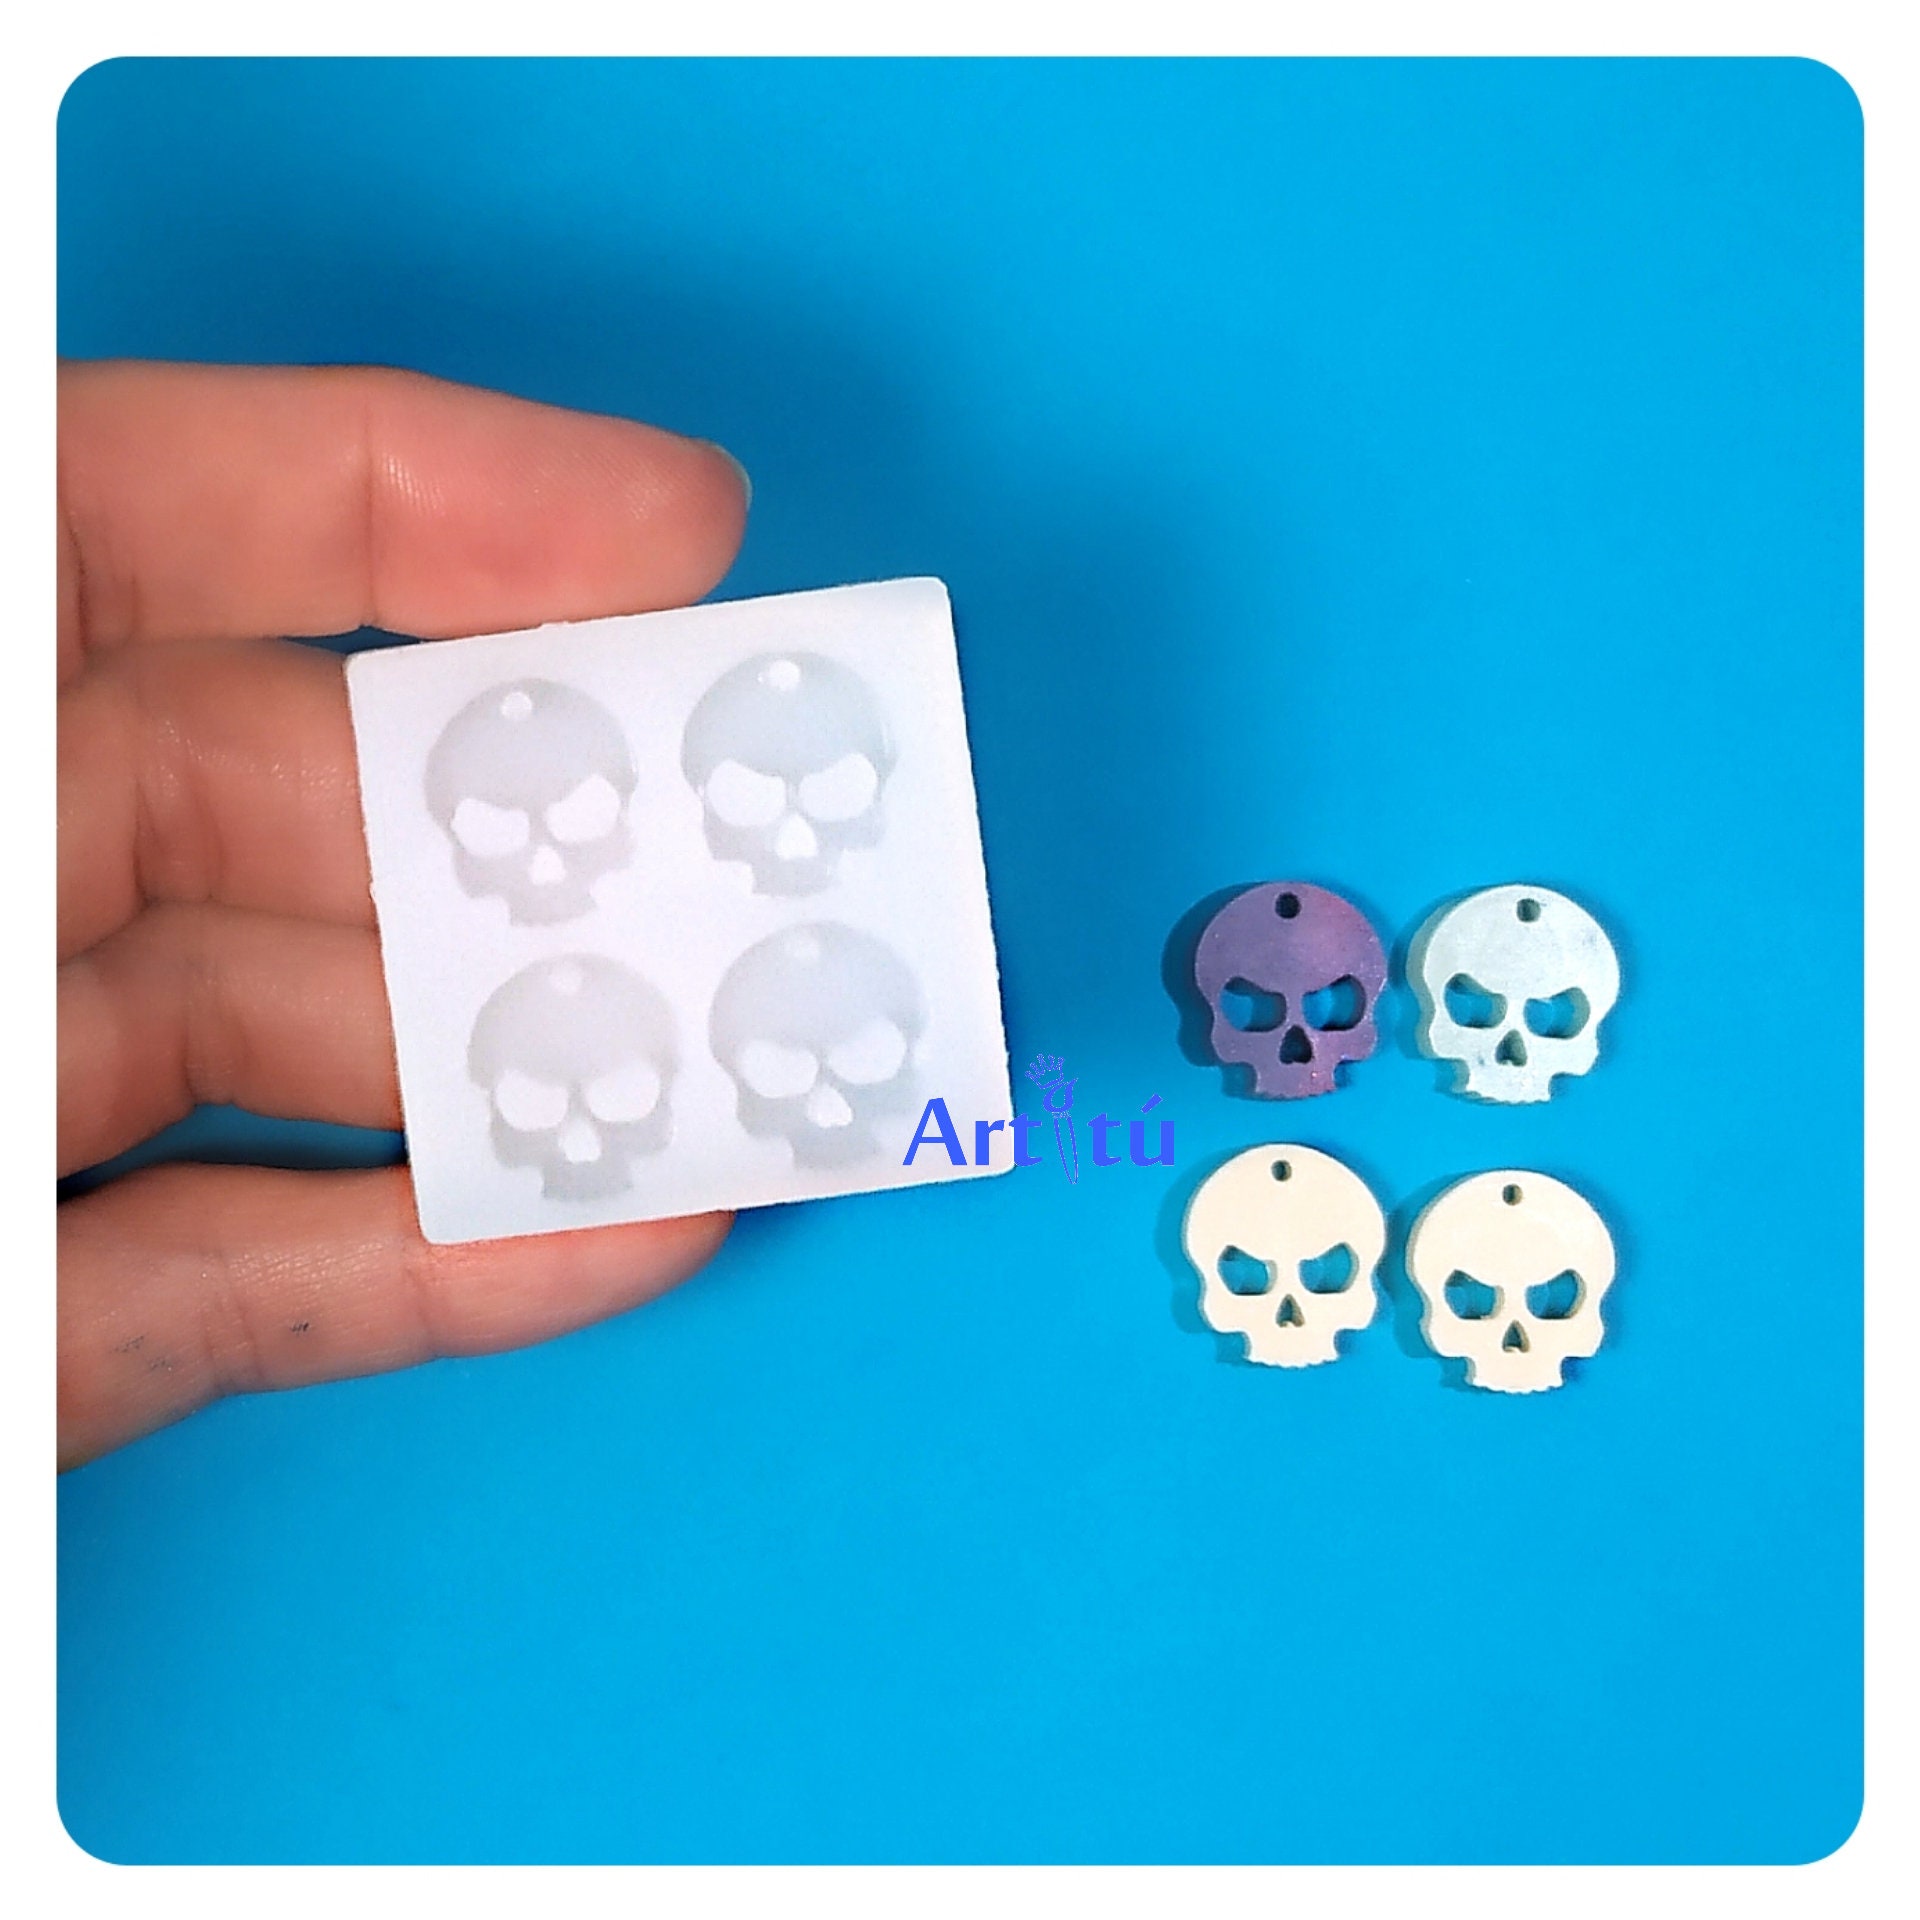 3/4 Small Skull Mold Shiny and Detailed Silicone Mold for Stud Earrings  Great for Resin and Clay Resin Earring Mold Stud Mold 